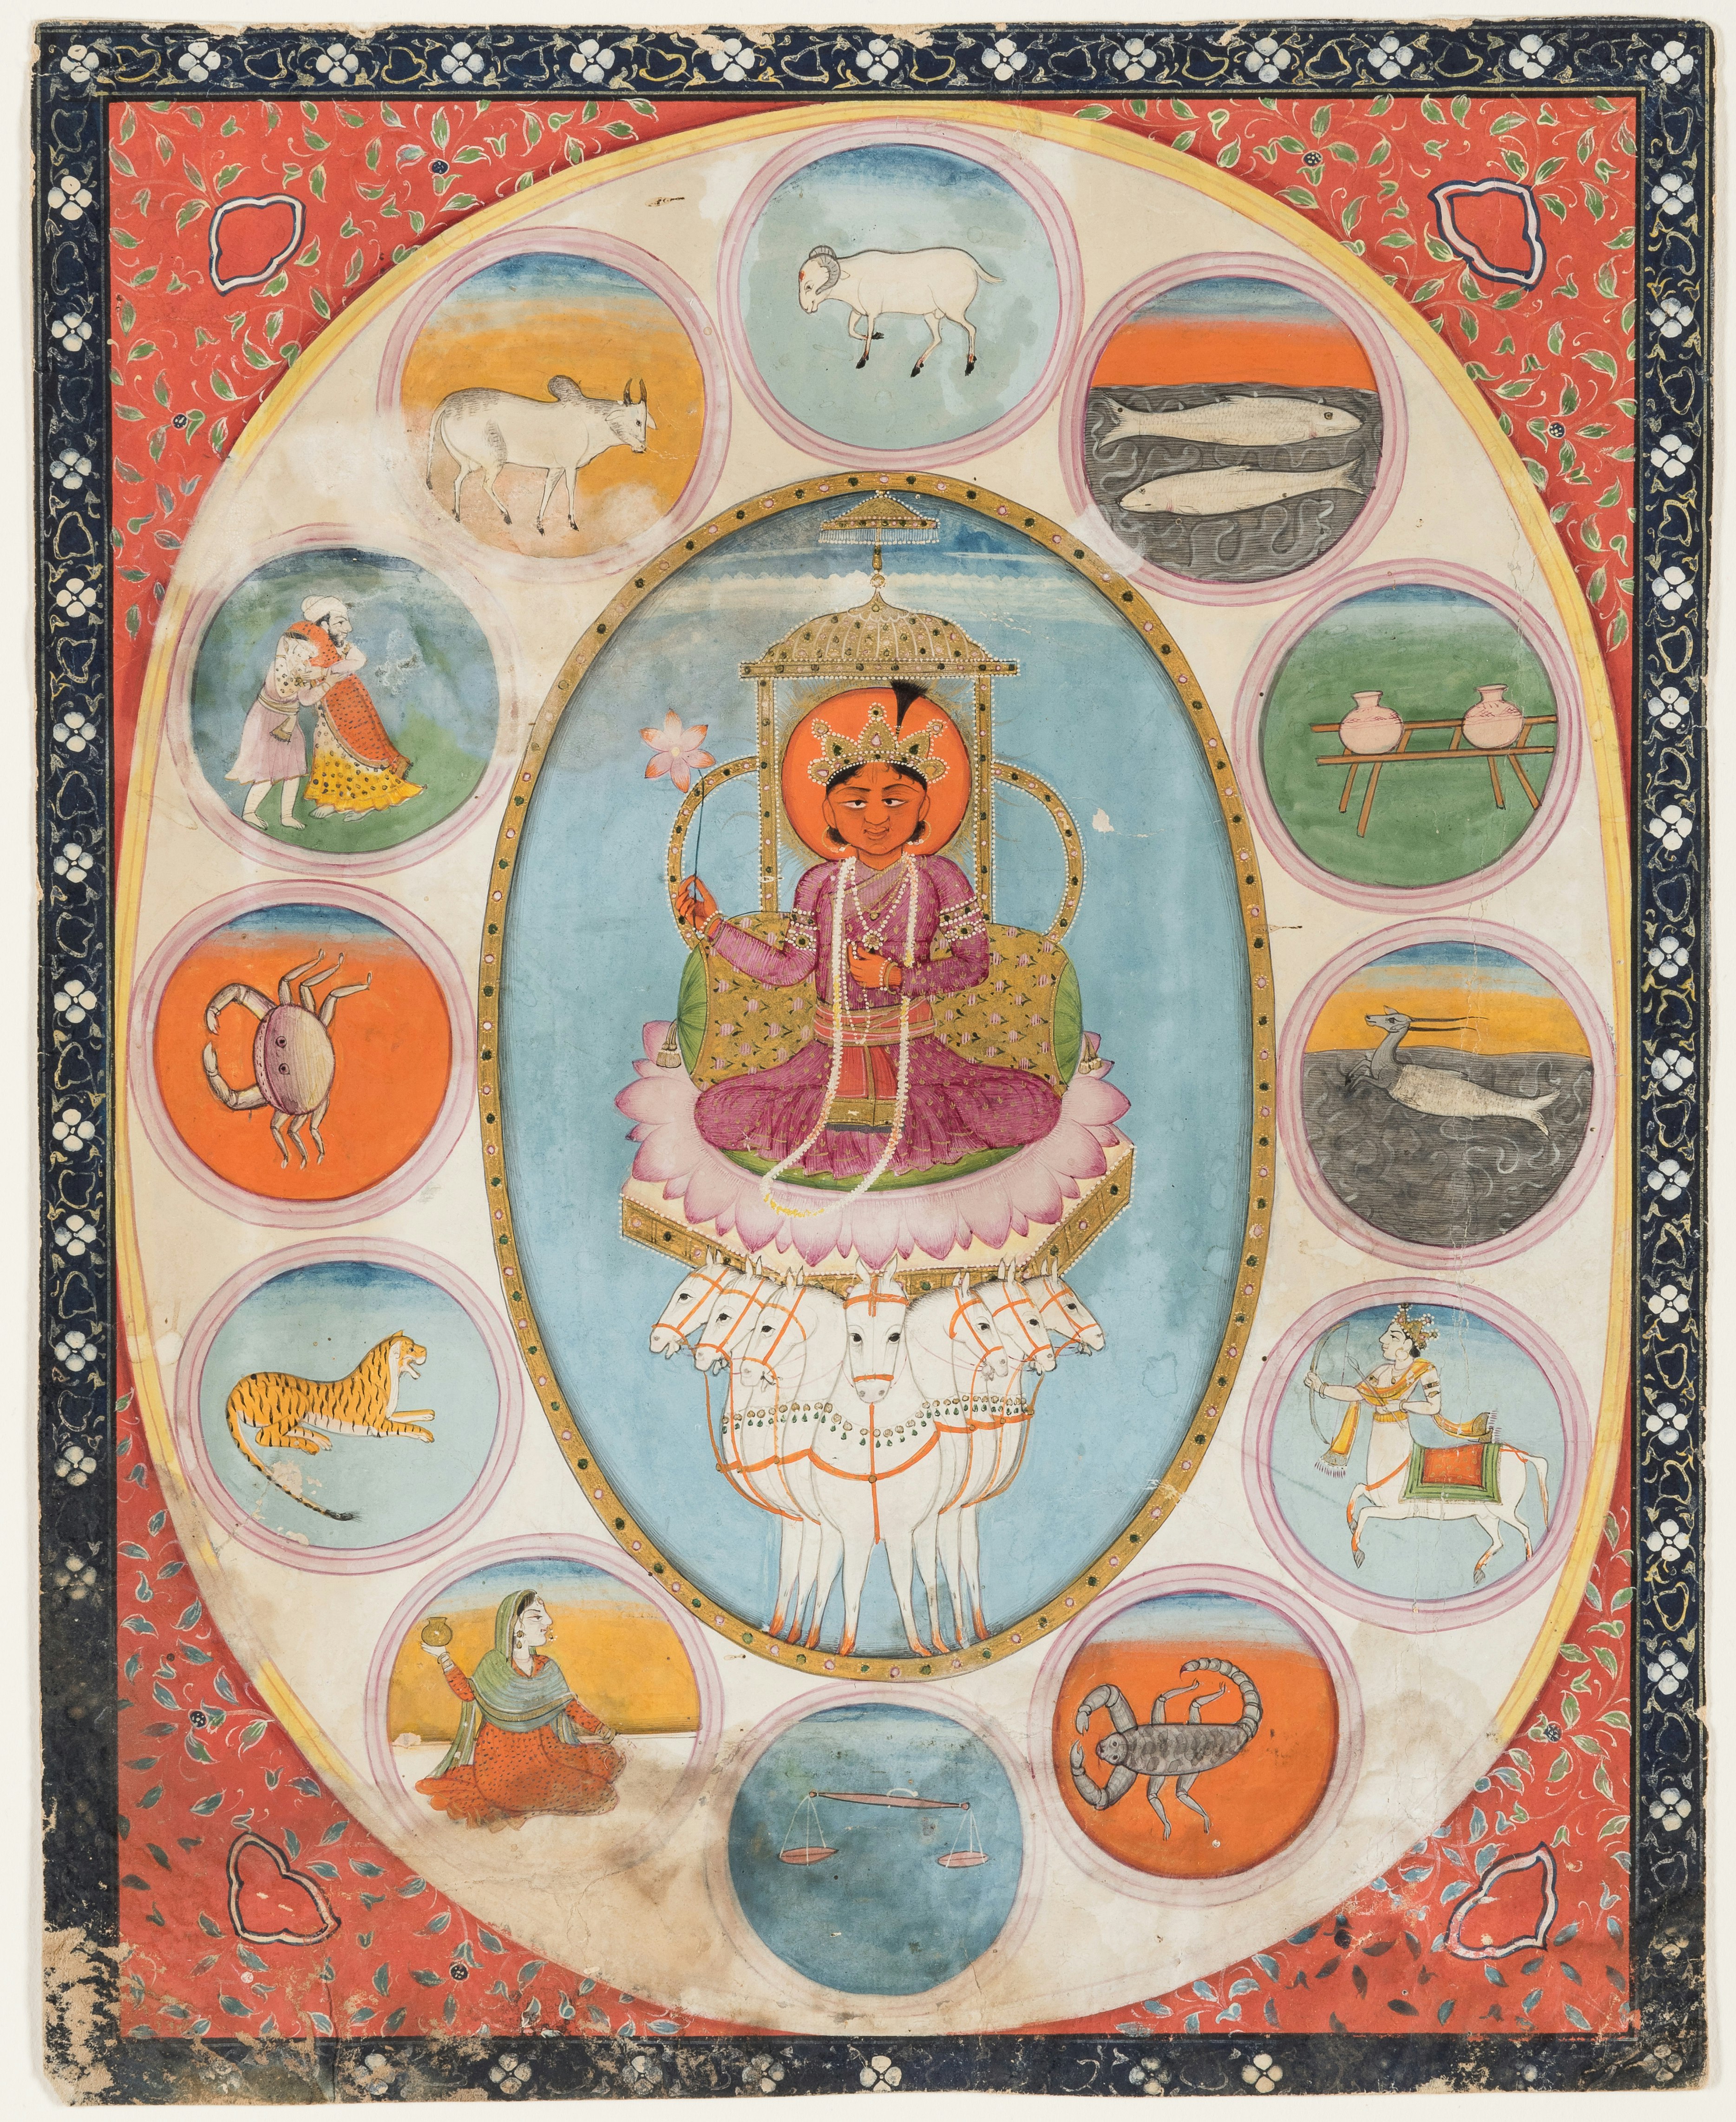 "Surya surrounded by the signs of the Zodiac," 1830. Painting. Courtesy of the San Diego Museum of Art.